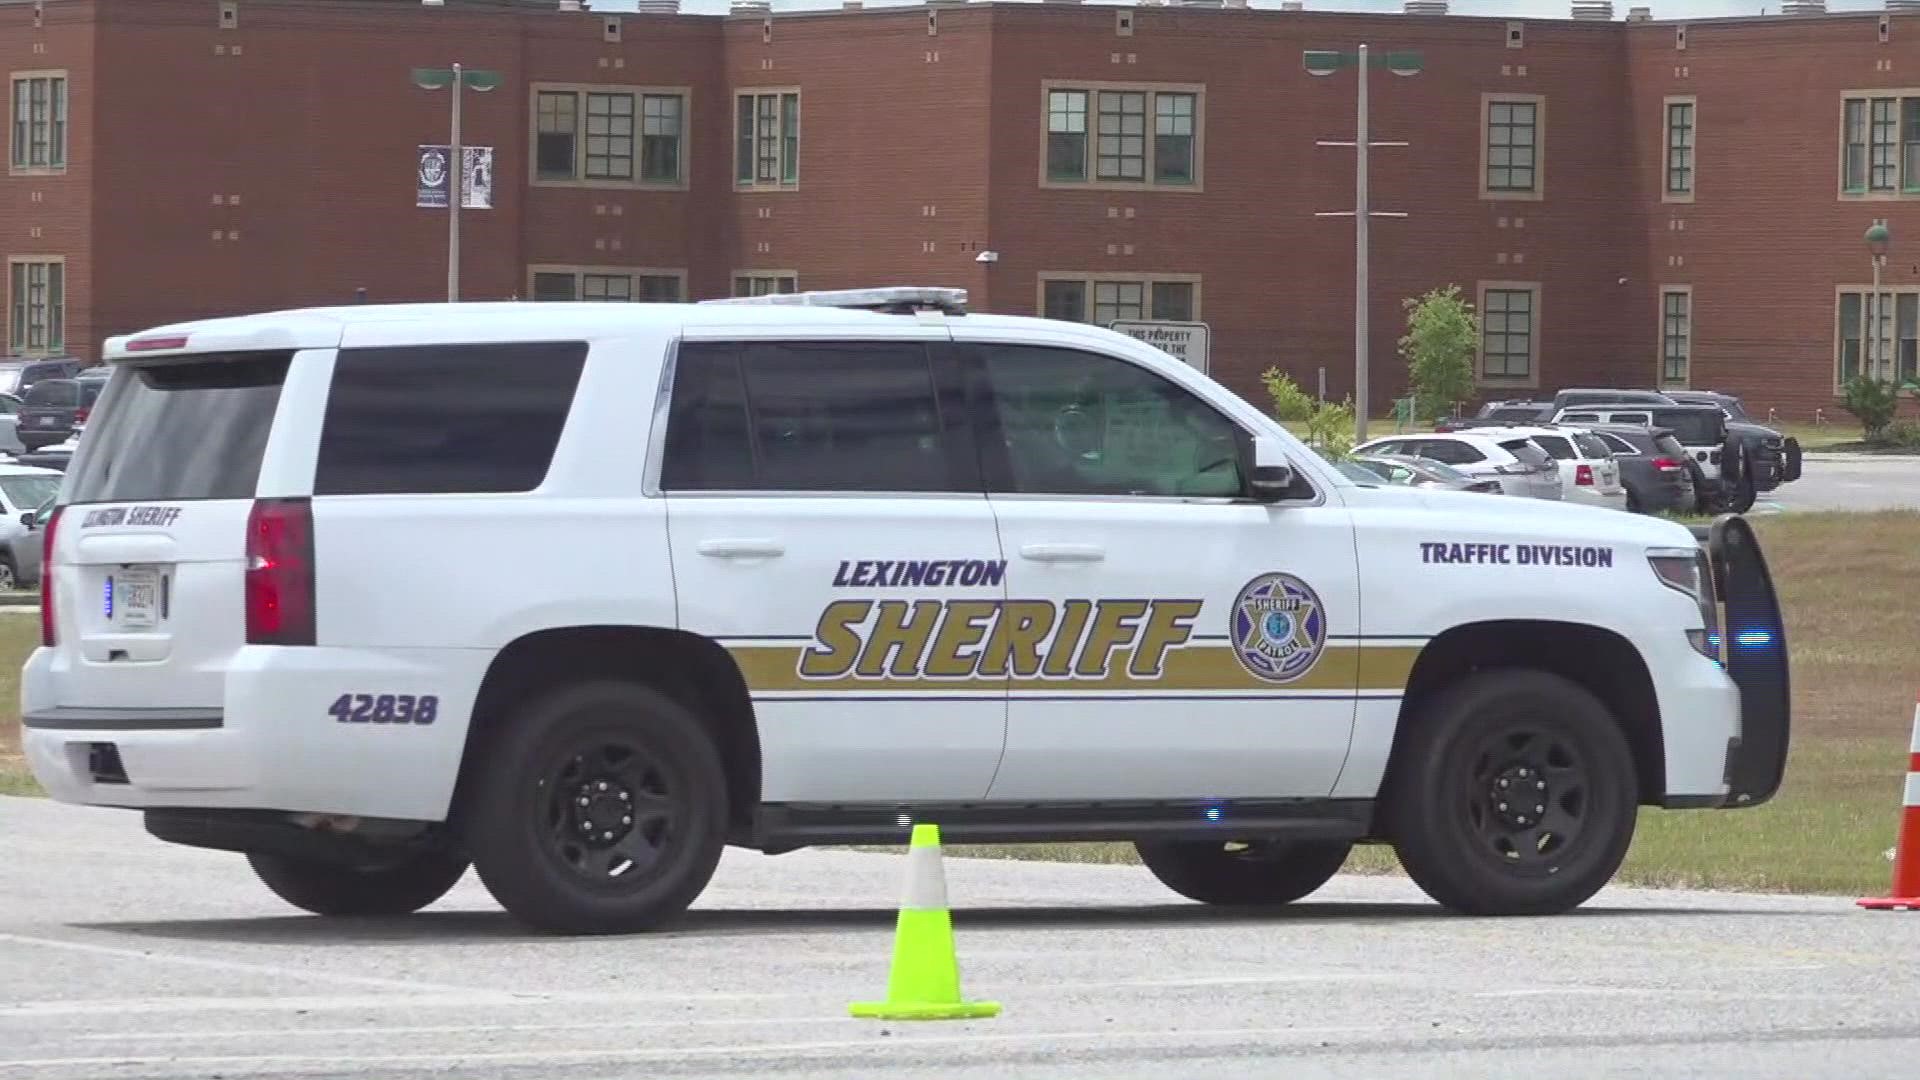 Lexington deputies responded to White Knoll High School on May 13 after a tip of a security threat.